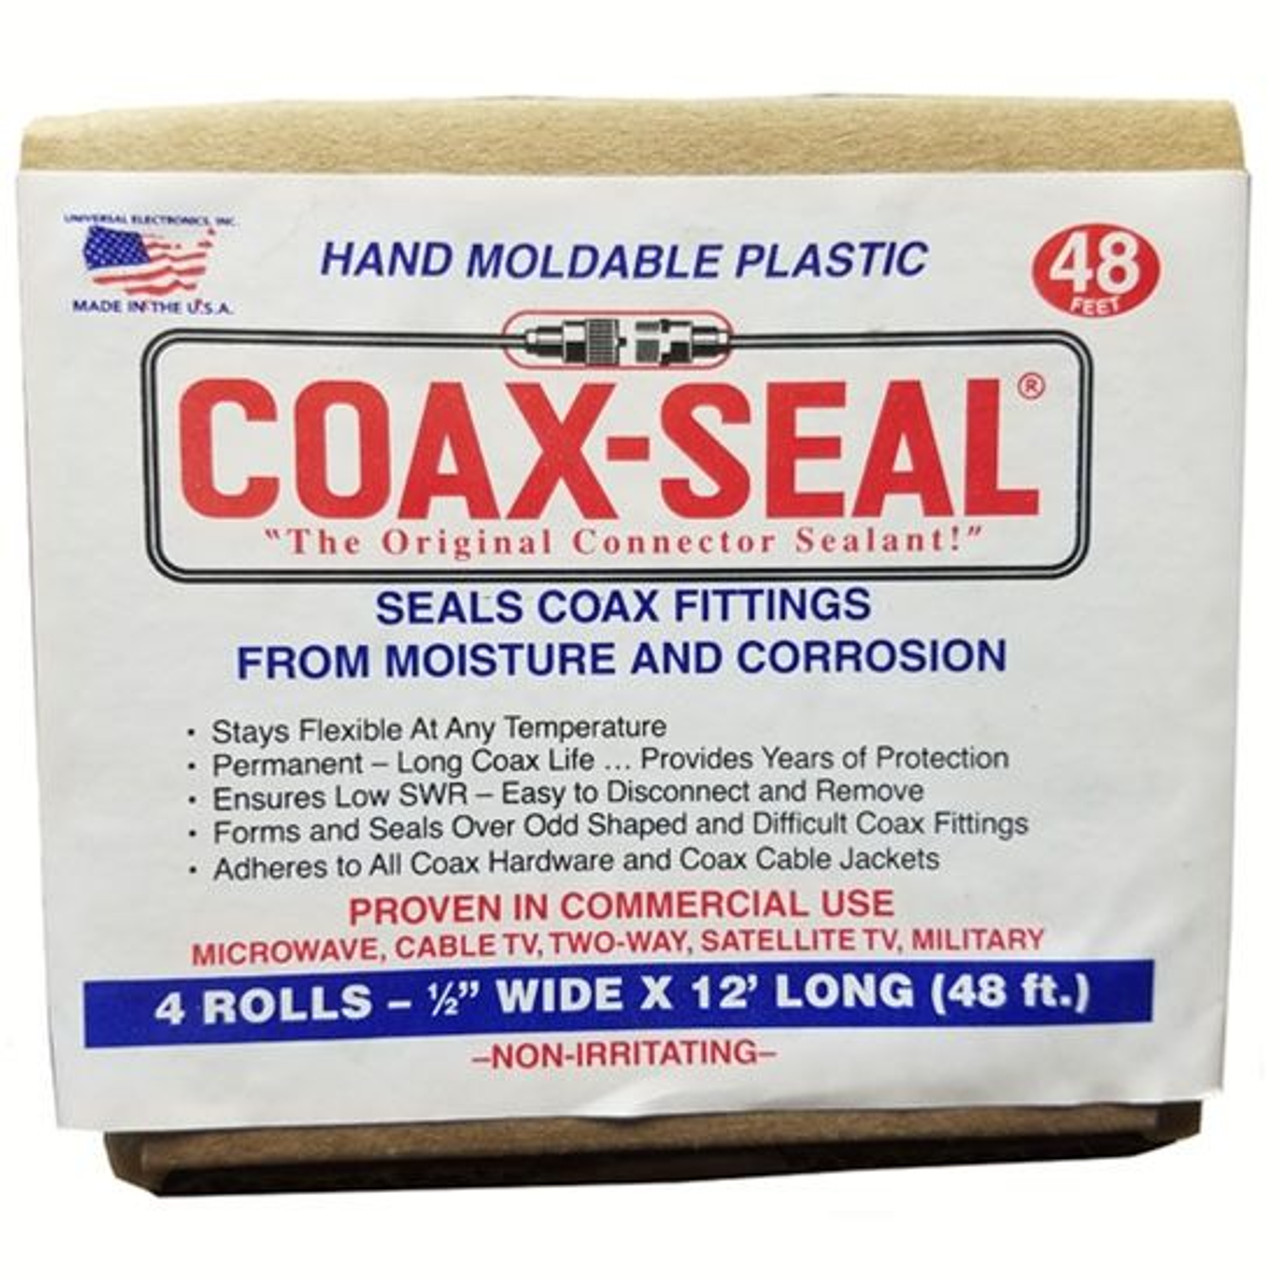 Coax-Seal 105 4 Pack 1/2" Inch x 12' Ft 3/32" Thick Hand Moldable Black Mastic Plastic Commercial Pack Tape Coax Sealant Tape for Fittings Universal Waterproof Non-Conducting Roll Wire Wrap